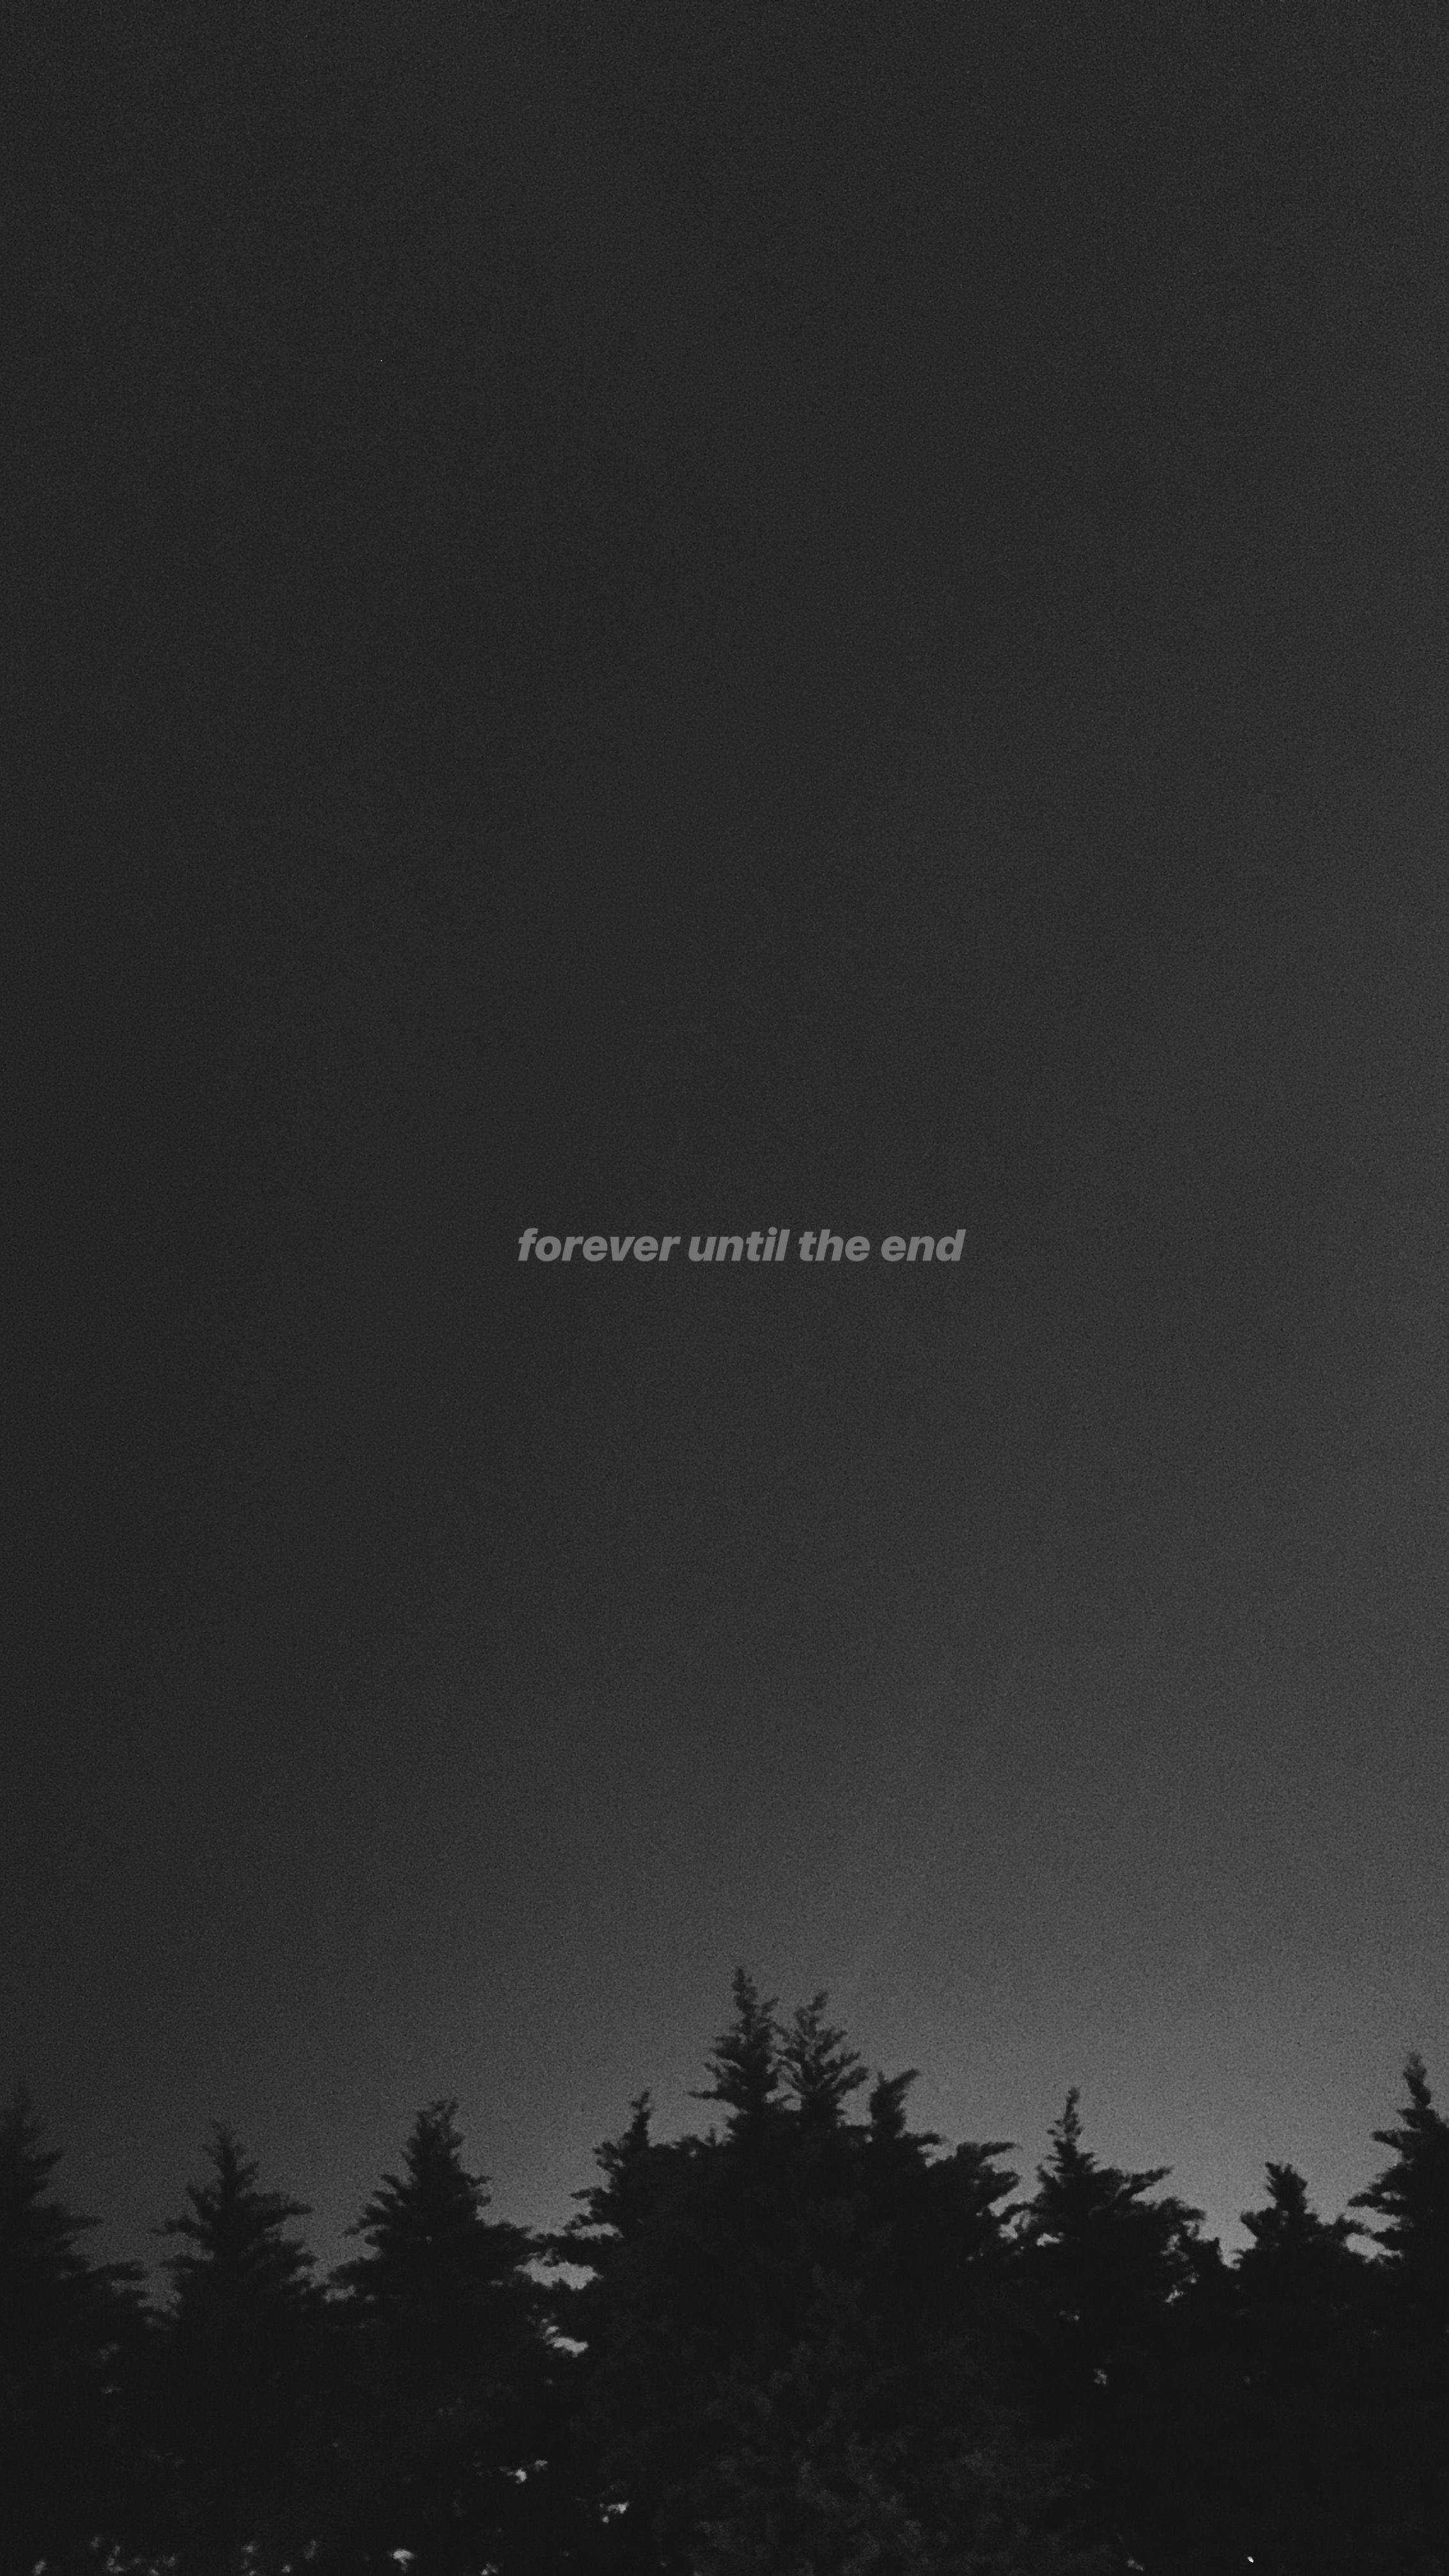 Forever Quote Dark Grey Iphone Wallpaper